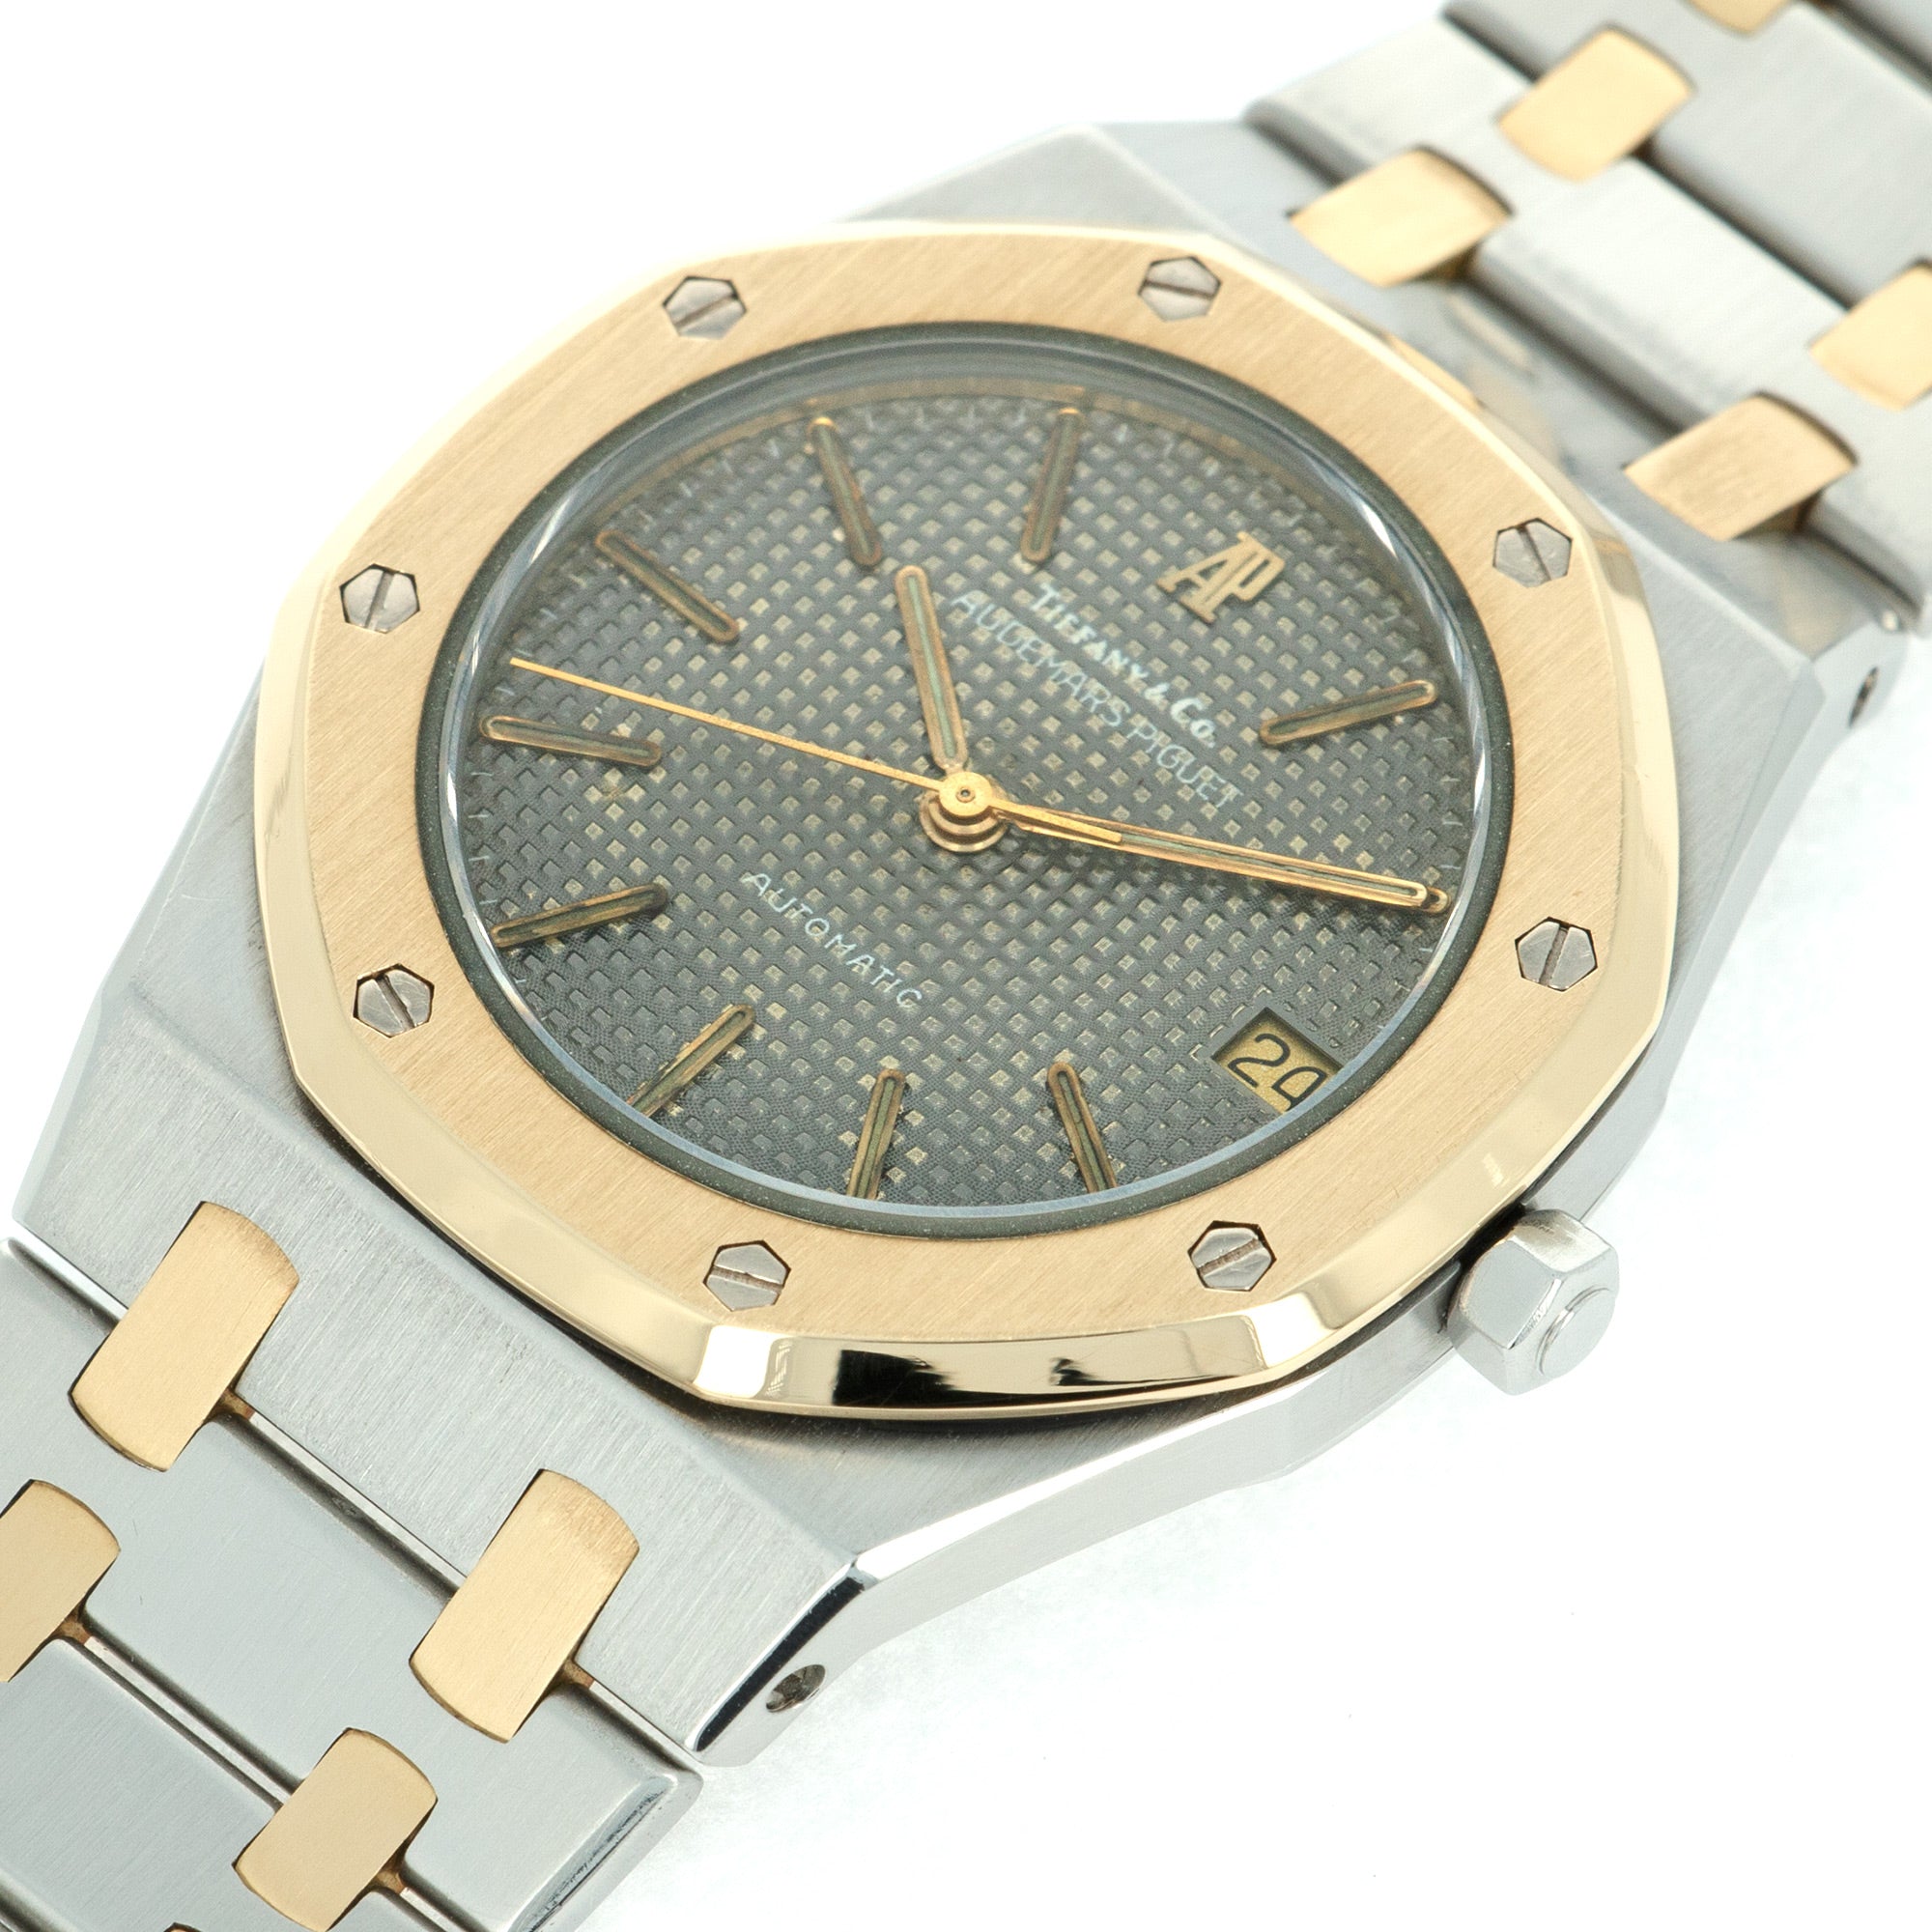 Audemars Piguet Two-Tone Royal Oak Automatic Watch Ref. 4100, Retailed by Tiffany &amp; Co.